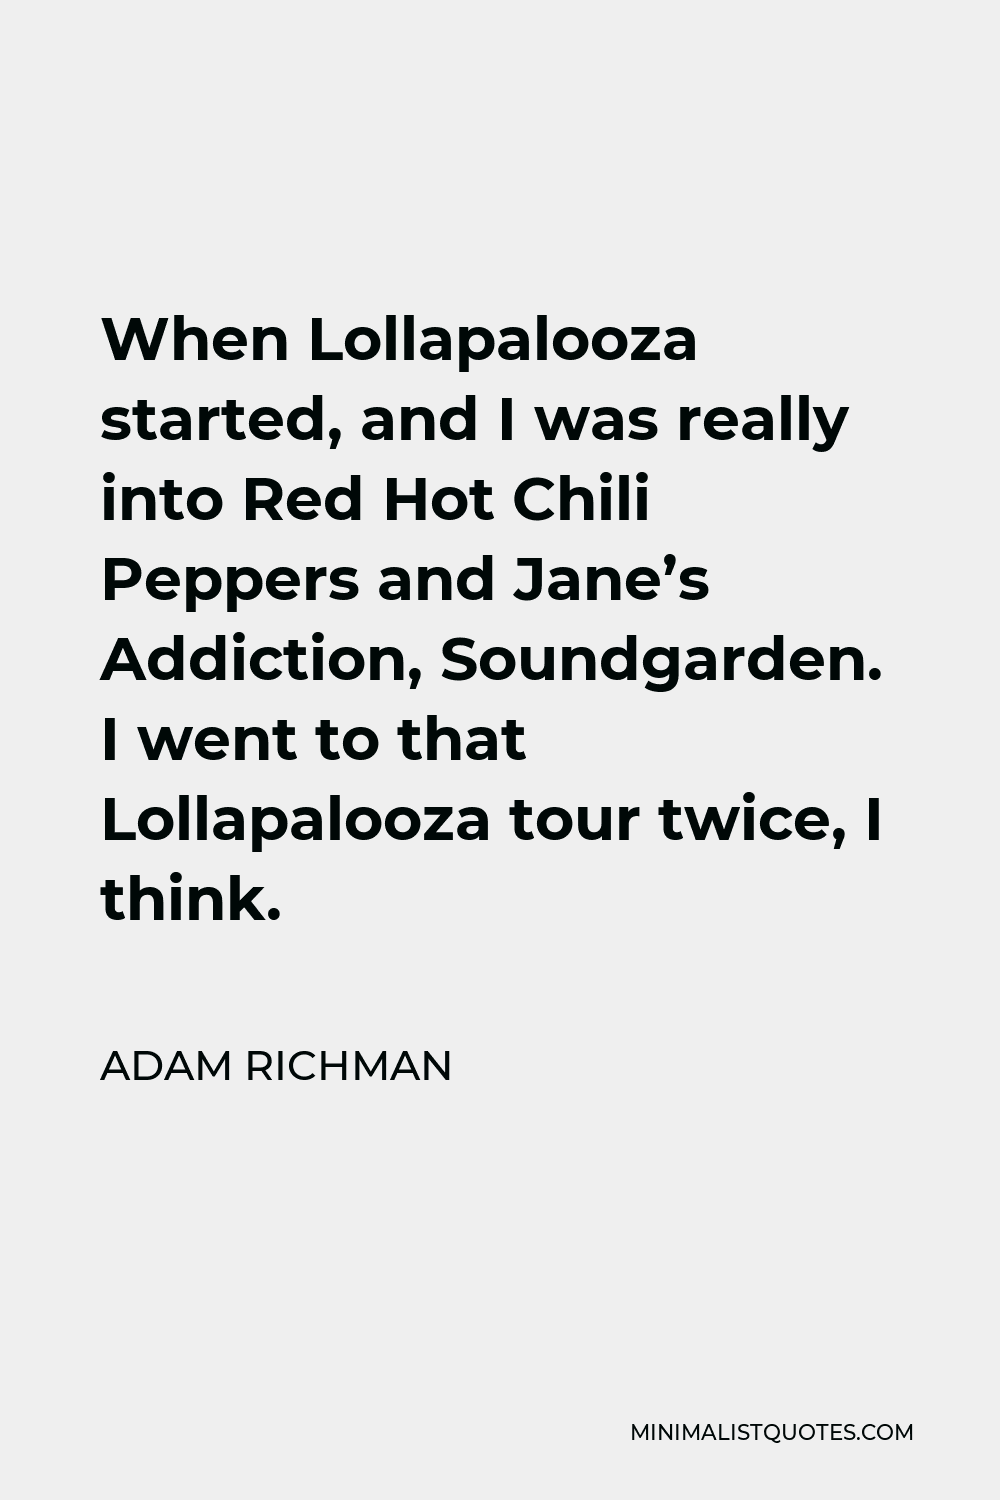 Adam Richman Quote - When Lollapalooza started, and I was really into Red Hot Chili Peppers and Jane’s Addiction, Soundgarden. I went to that Lollapalooza tour twice, I think.